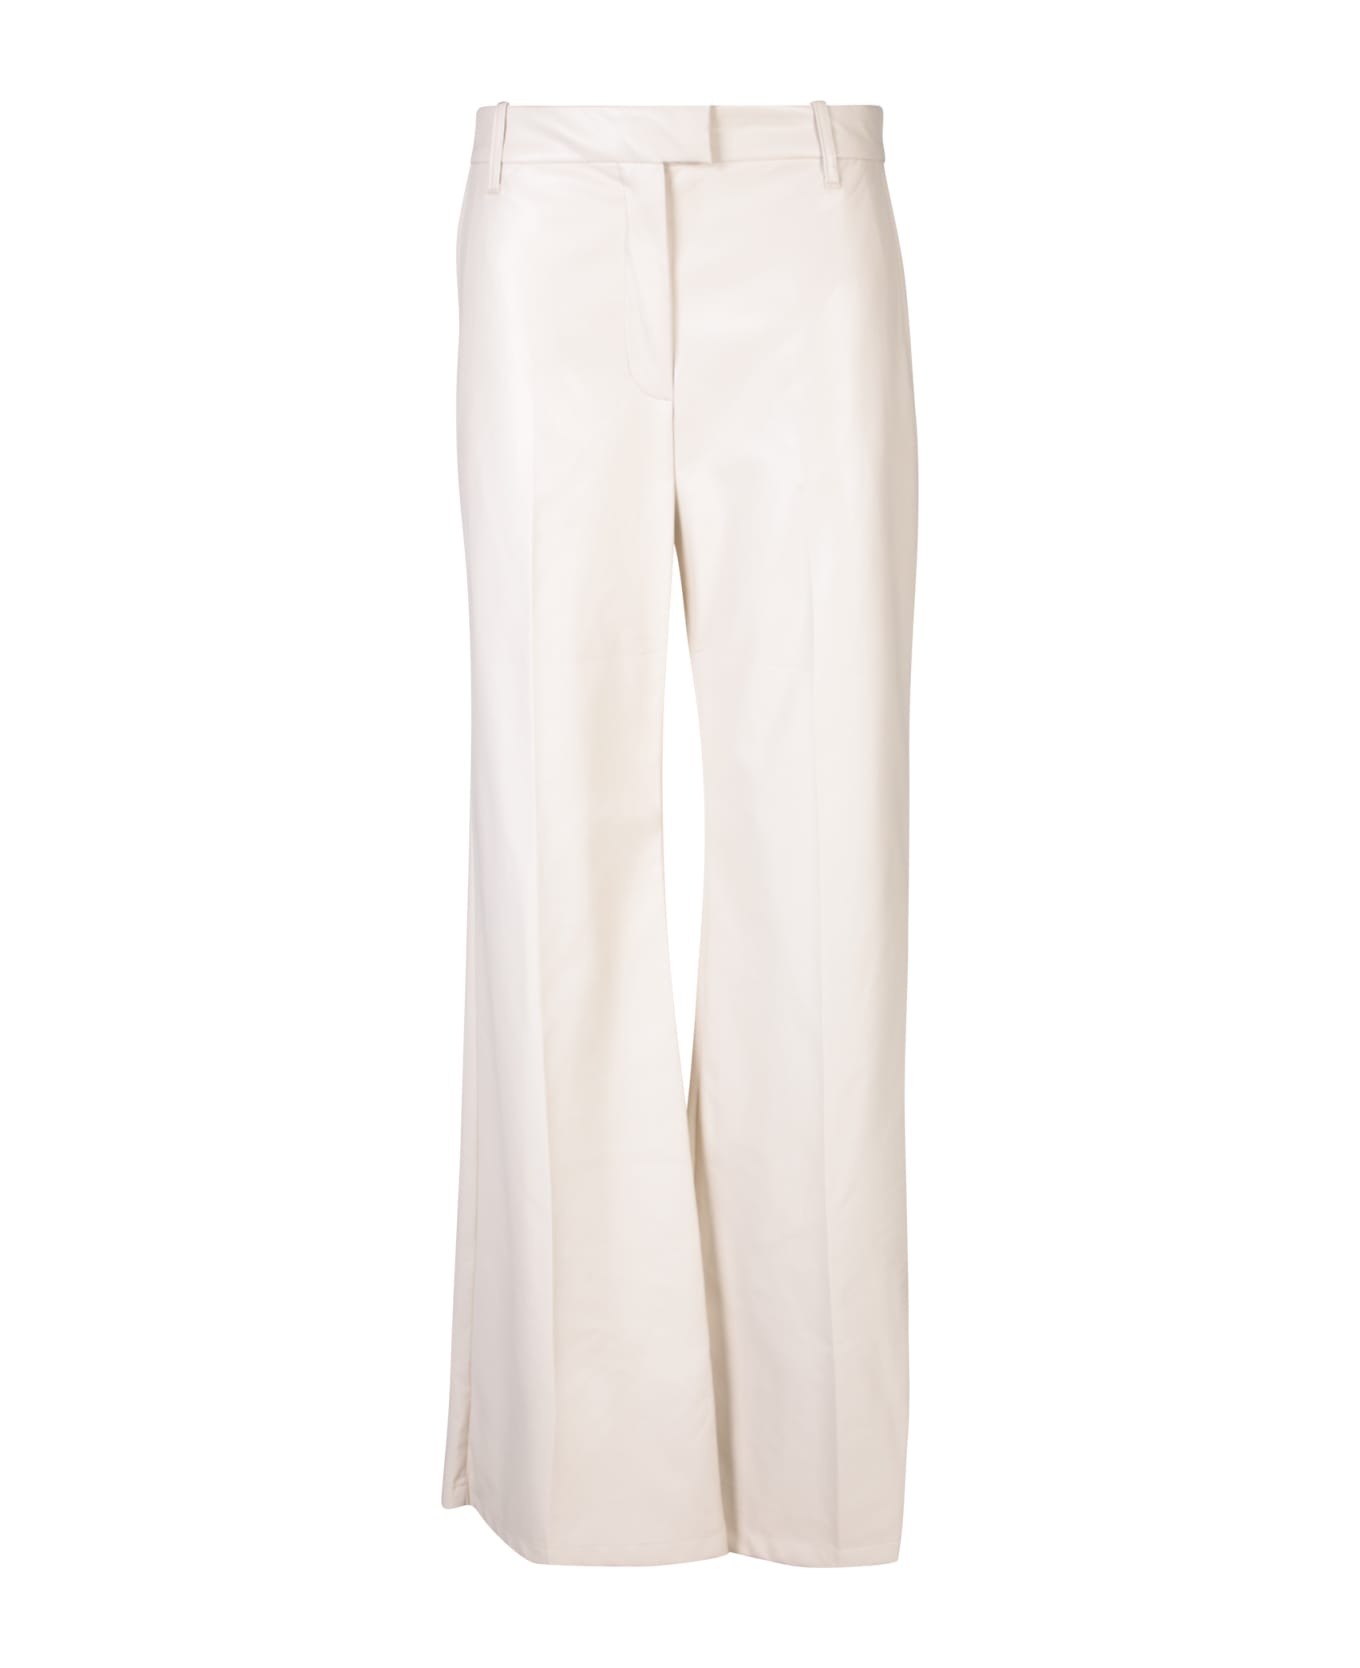 STAND STUDIO Ivory Faux Leather Flare Trousers - White